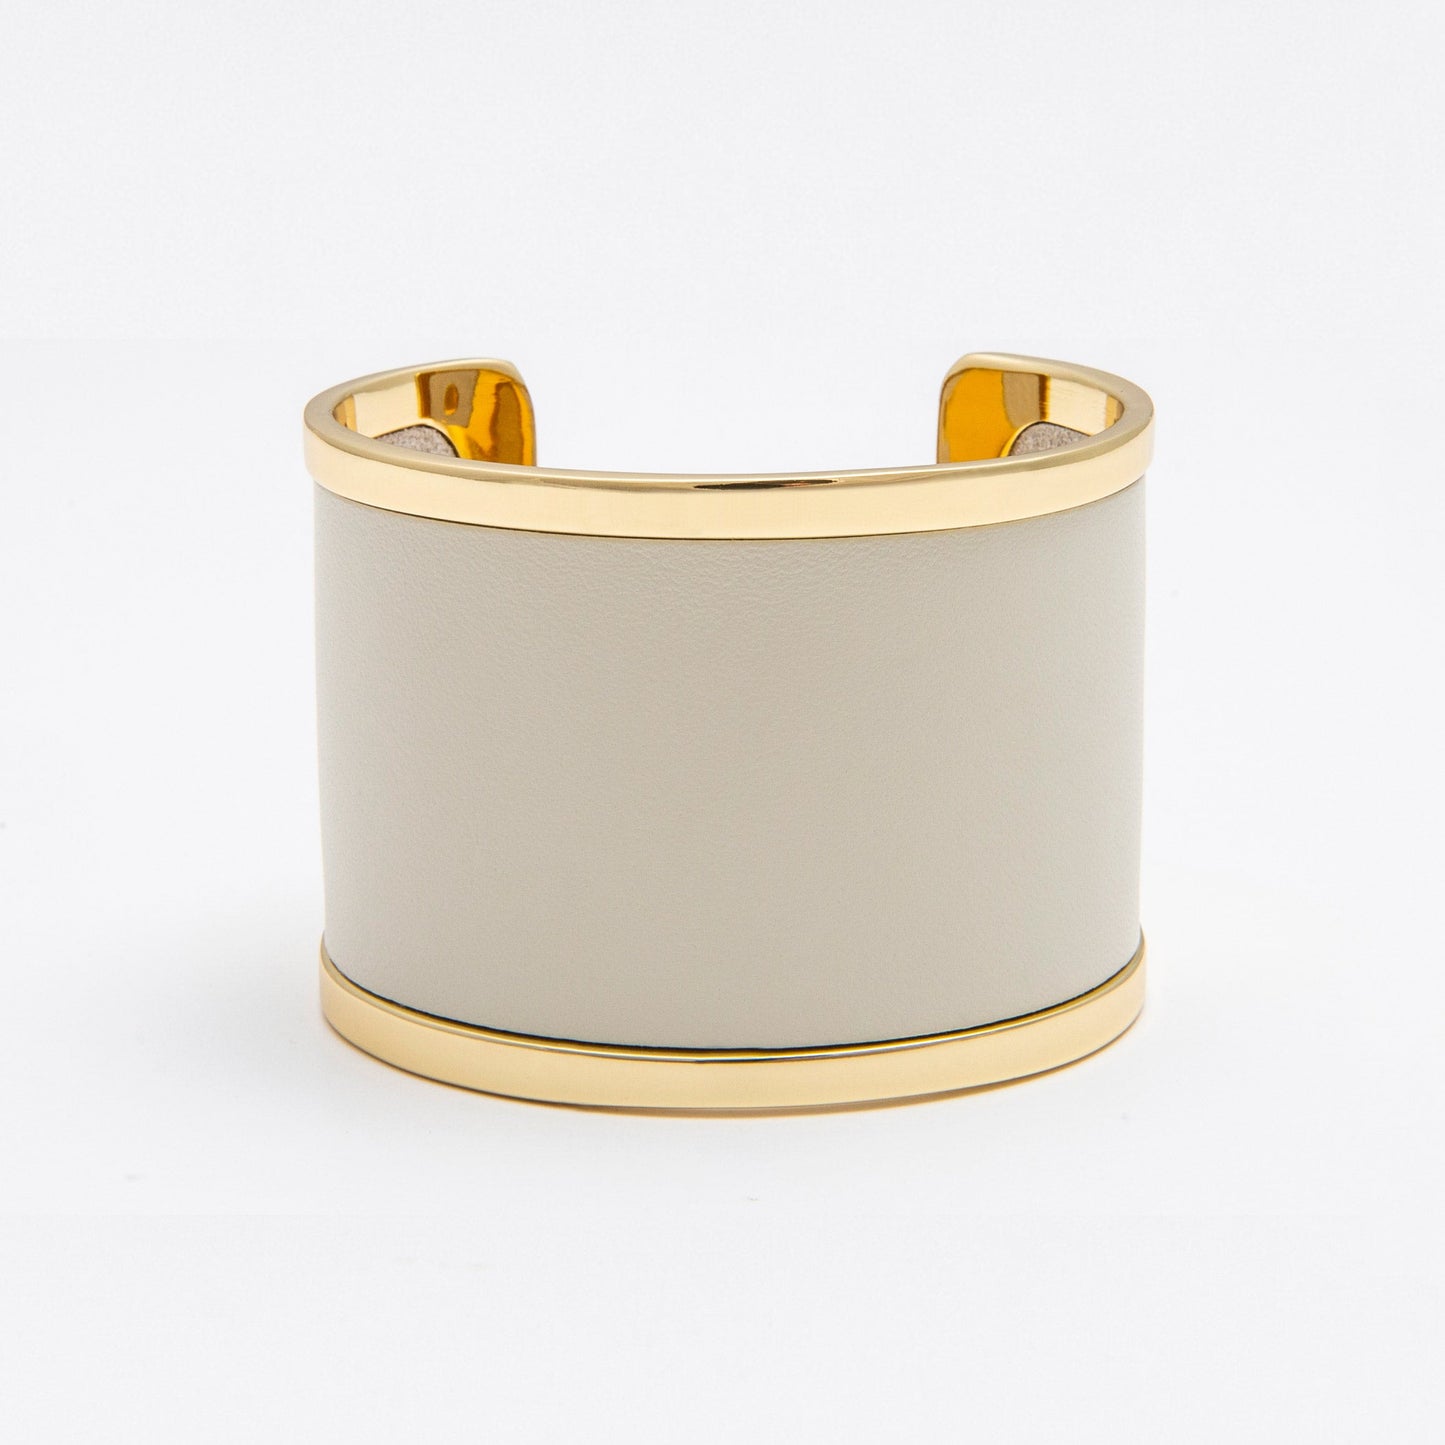 OG3 Gold Cuff with Basic Leathers